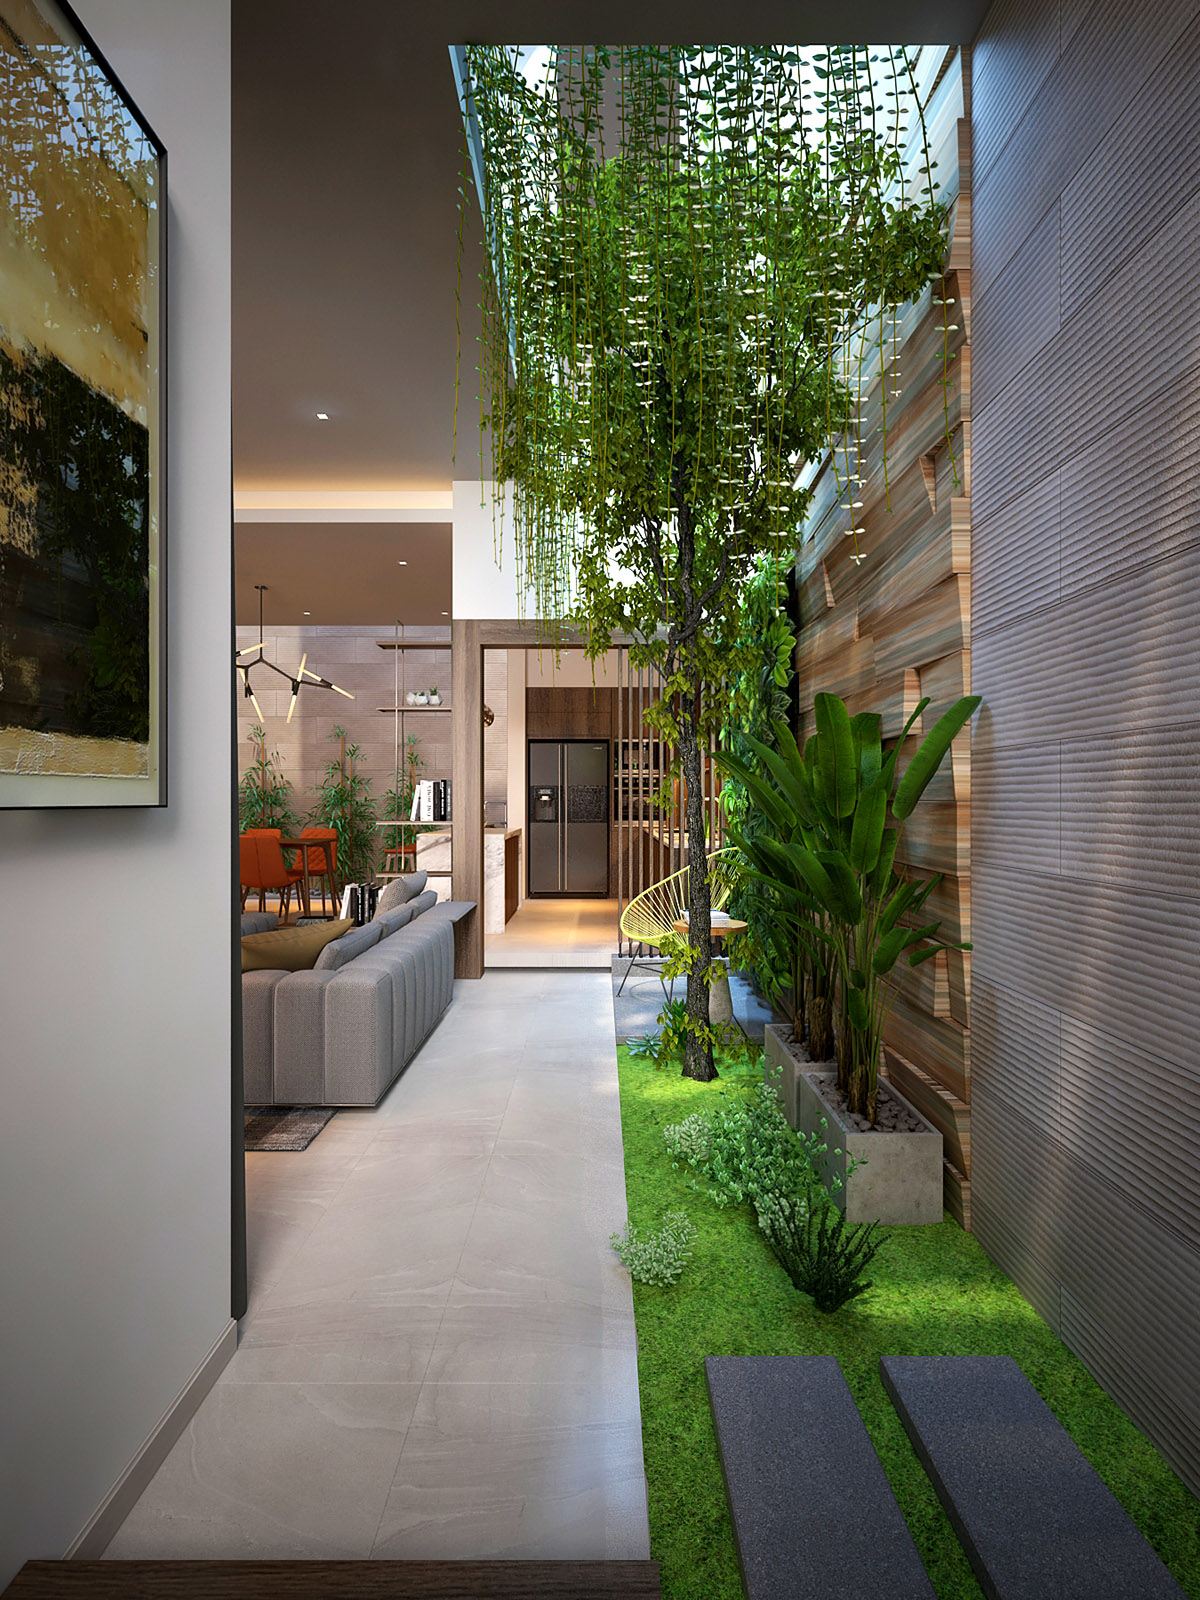 green inside spaces indoor courtyard homes gardens courtyards garden room designing terrariums feature beautiful interior living outdoor natural attached walls